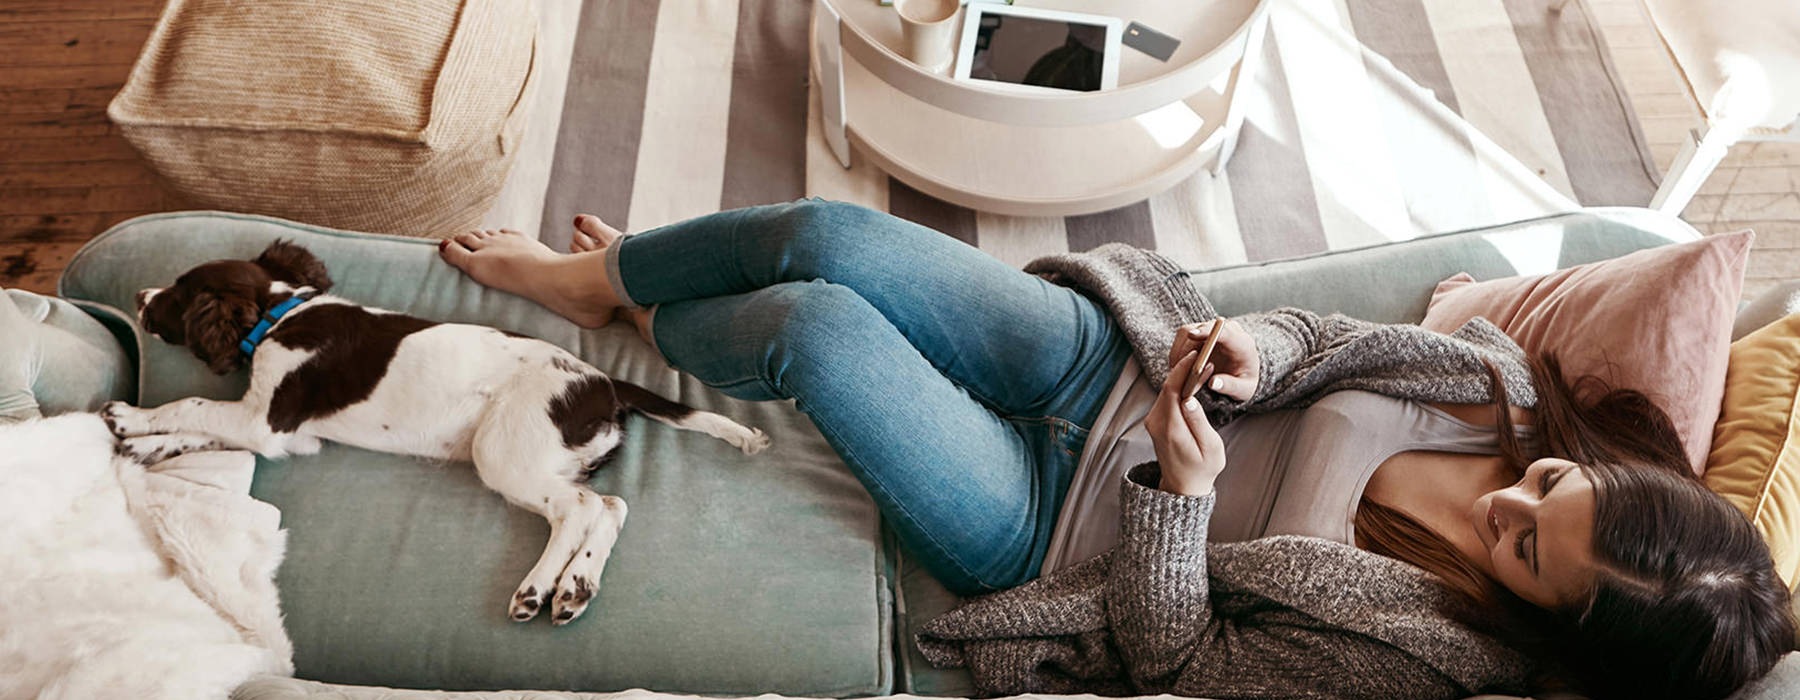 woman relaxing with dog on couch